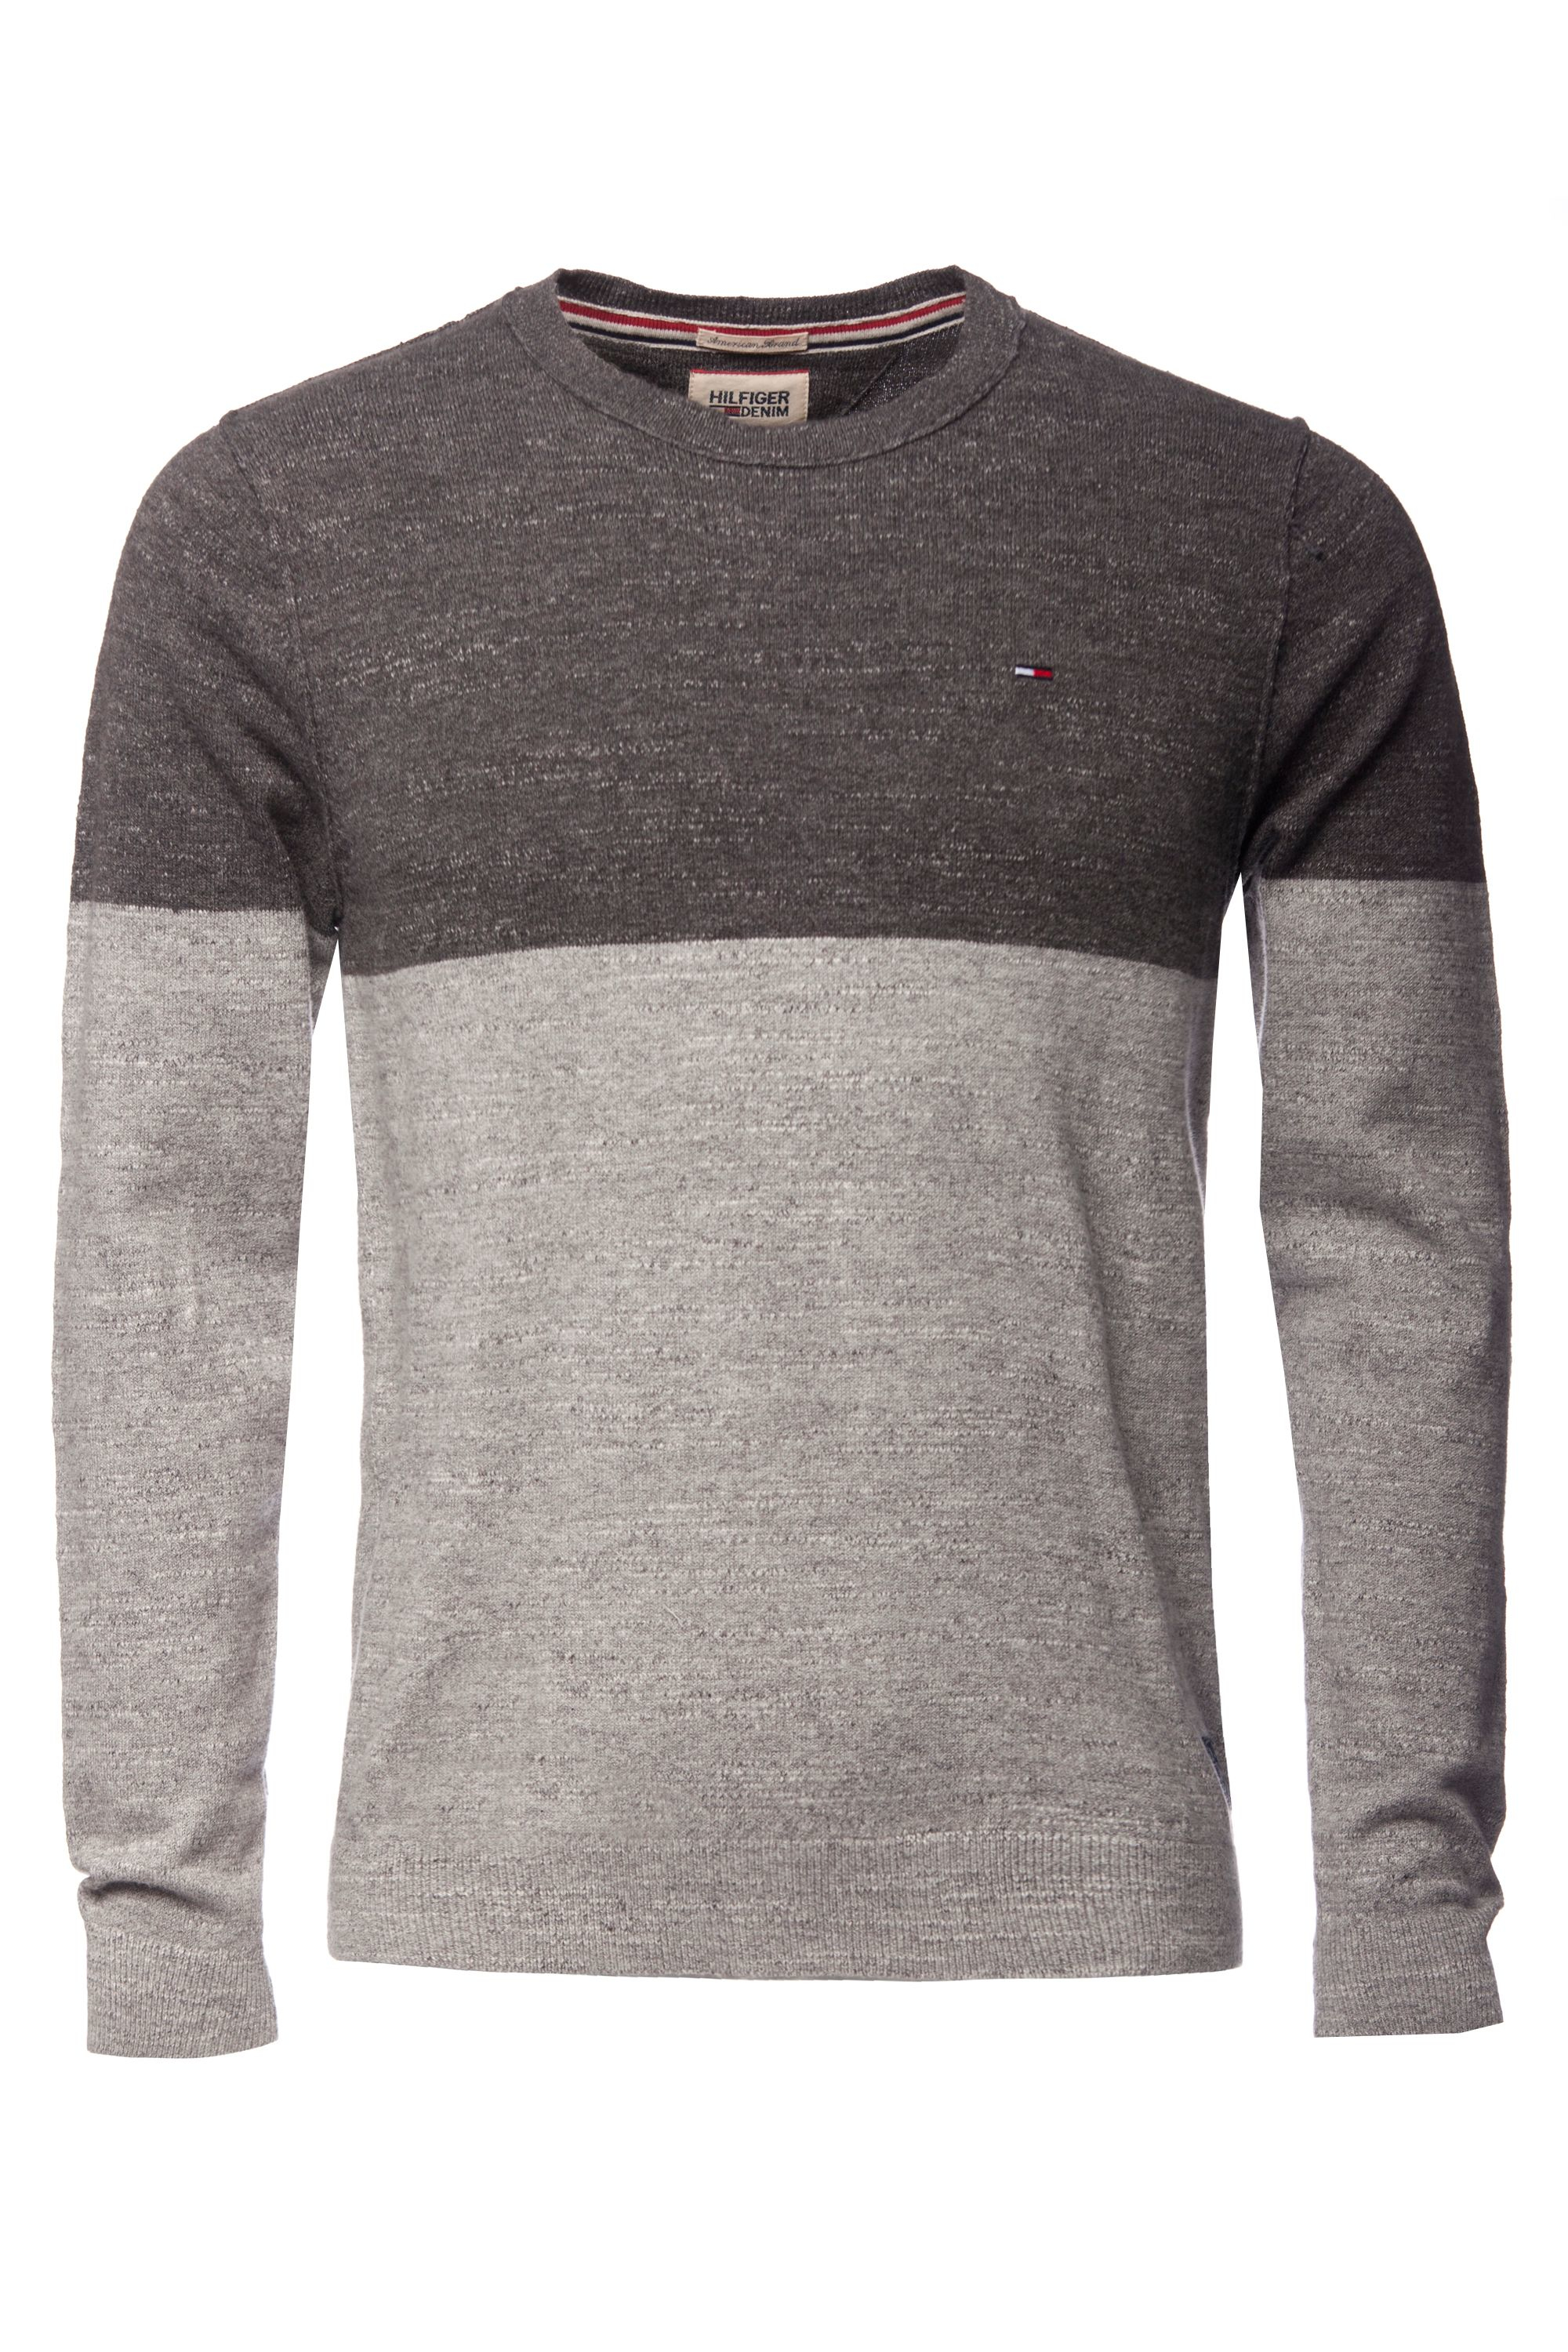 Tommy Hilfiger Cotton Georgia Sweater in Grey (Gray) for Men - Lyst